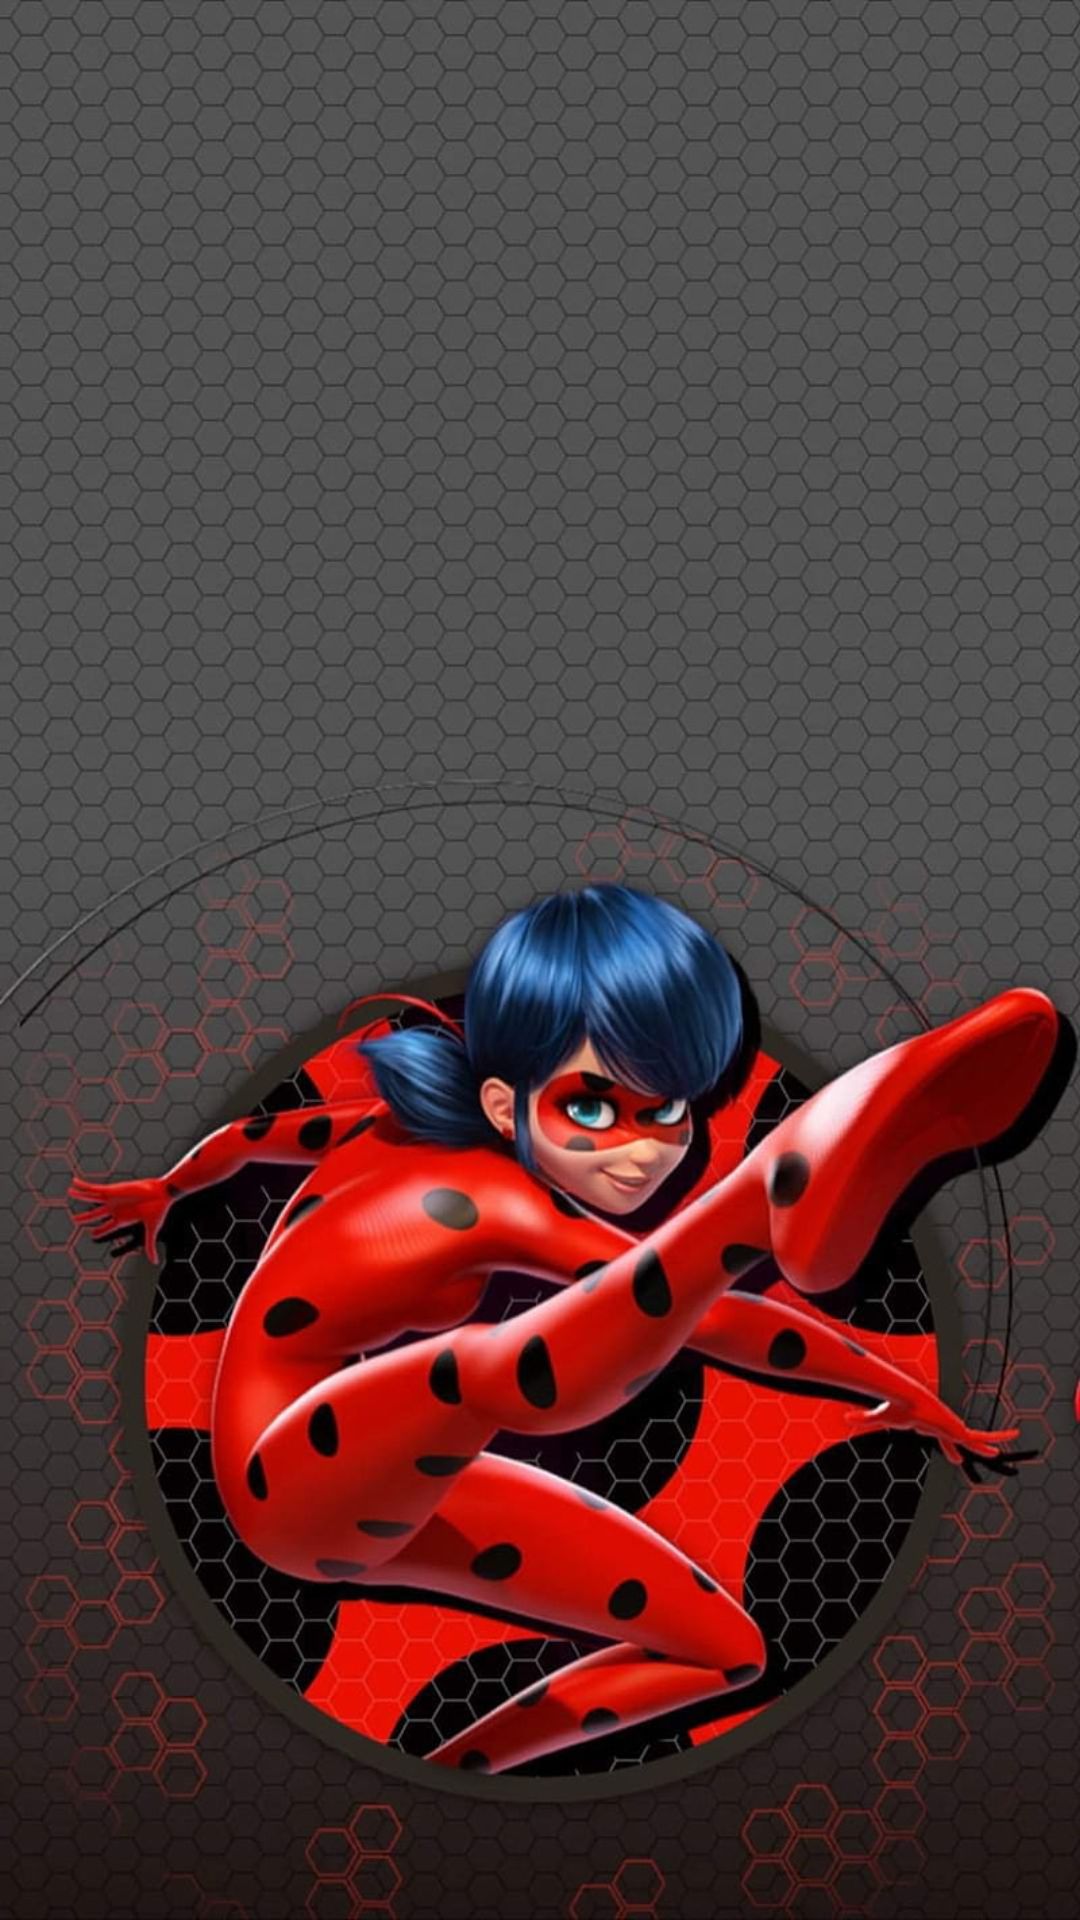 Ladybug Wallpaper Pictures